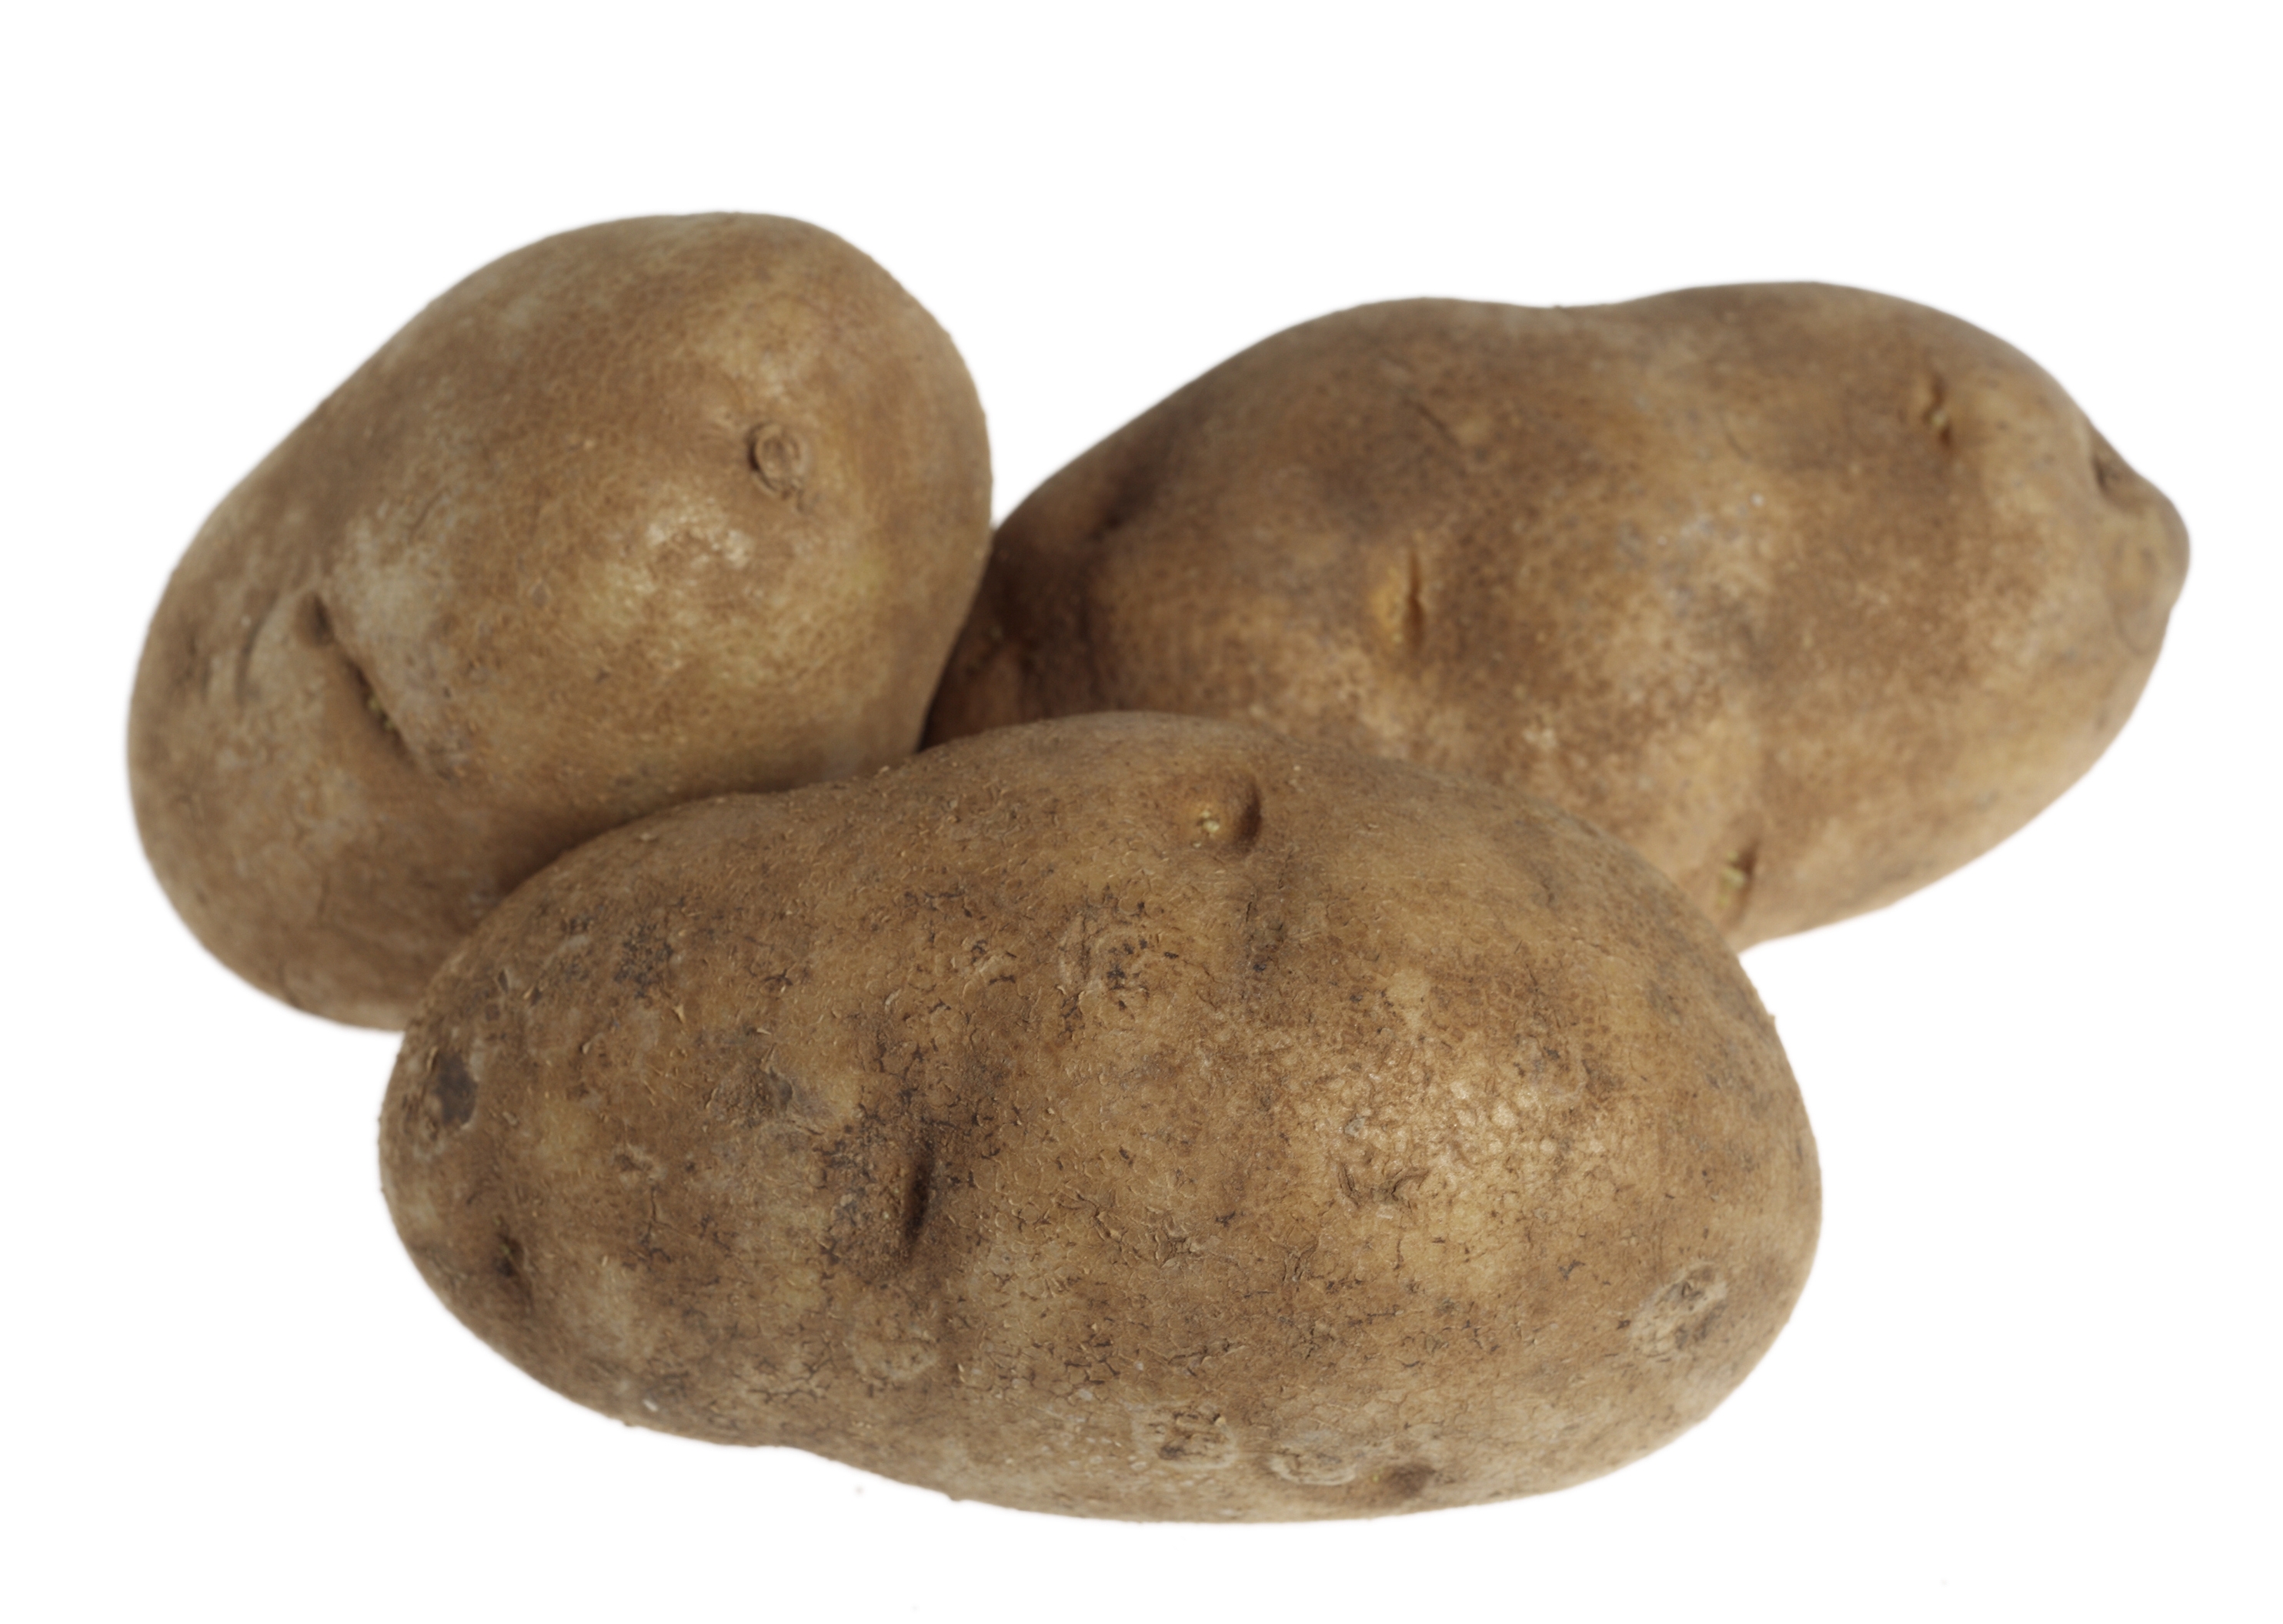 UPC 033383536101 product image for Food You Feel Good About Potatoes, Idaho, Russet, Premium 5 lb (2.27 kg) | upcitemdb.com